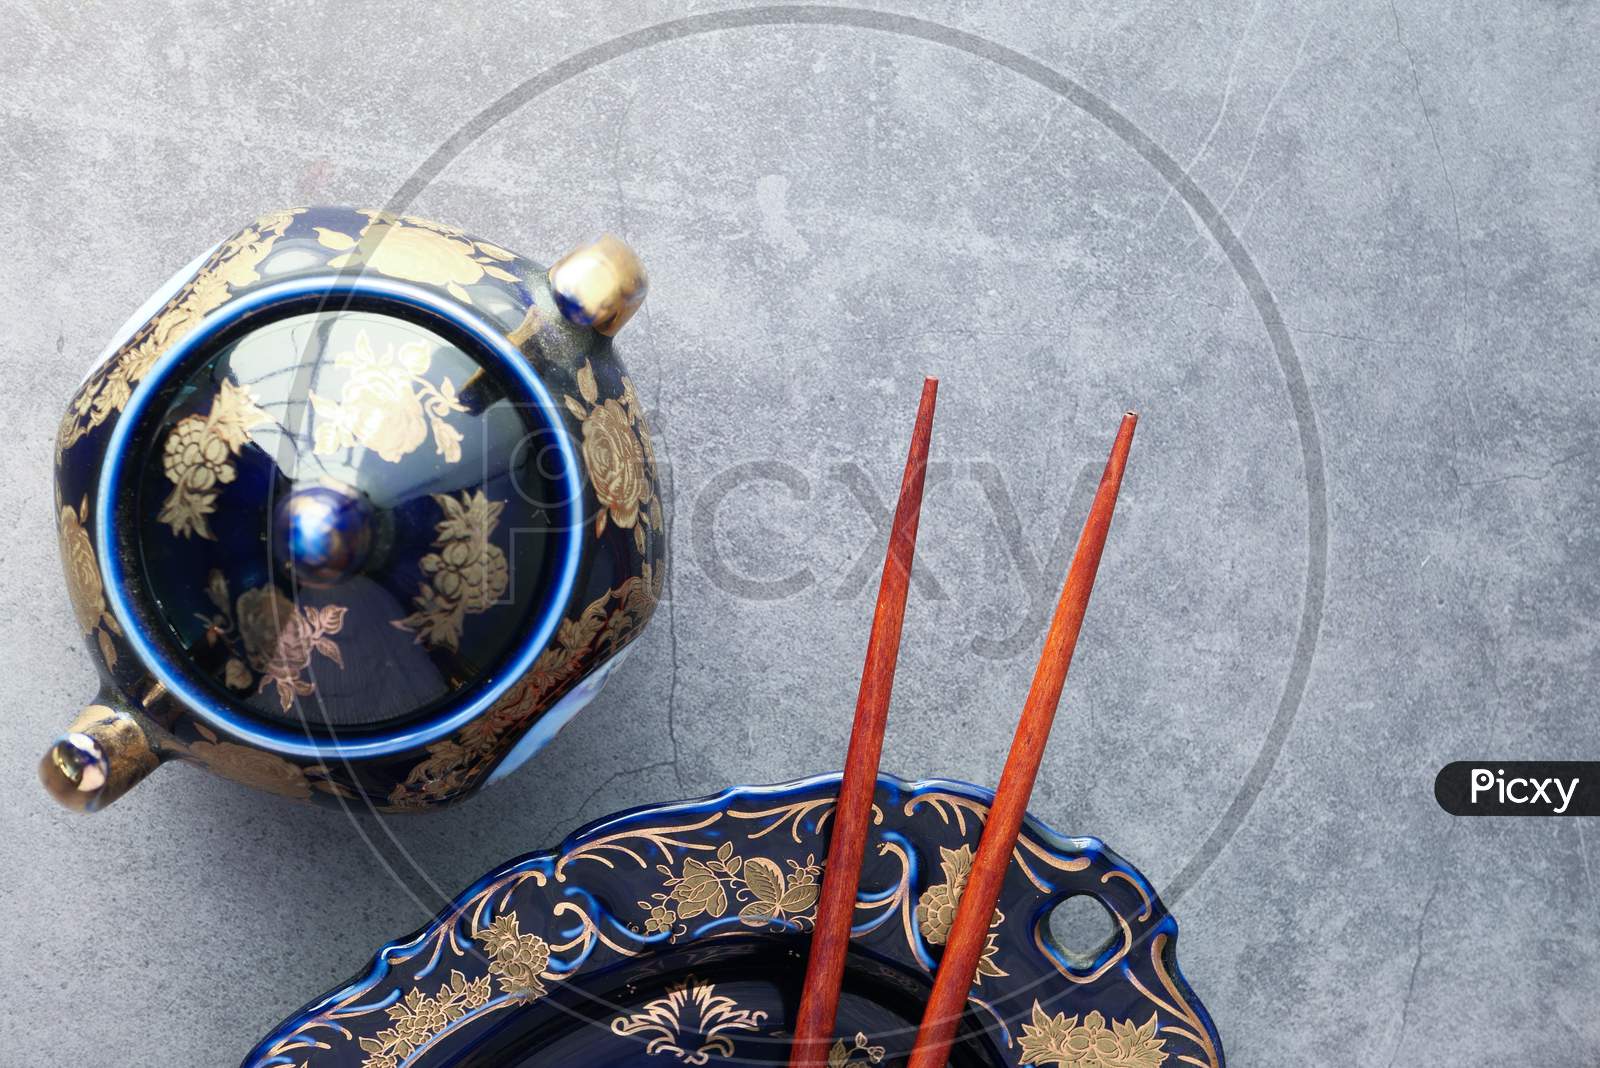 Empty Plate, Teapot With Herbal Tea And Chopsticks Over Table